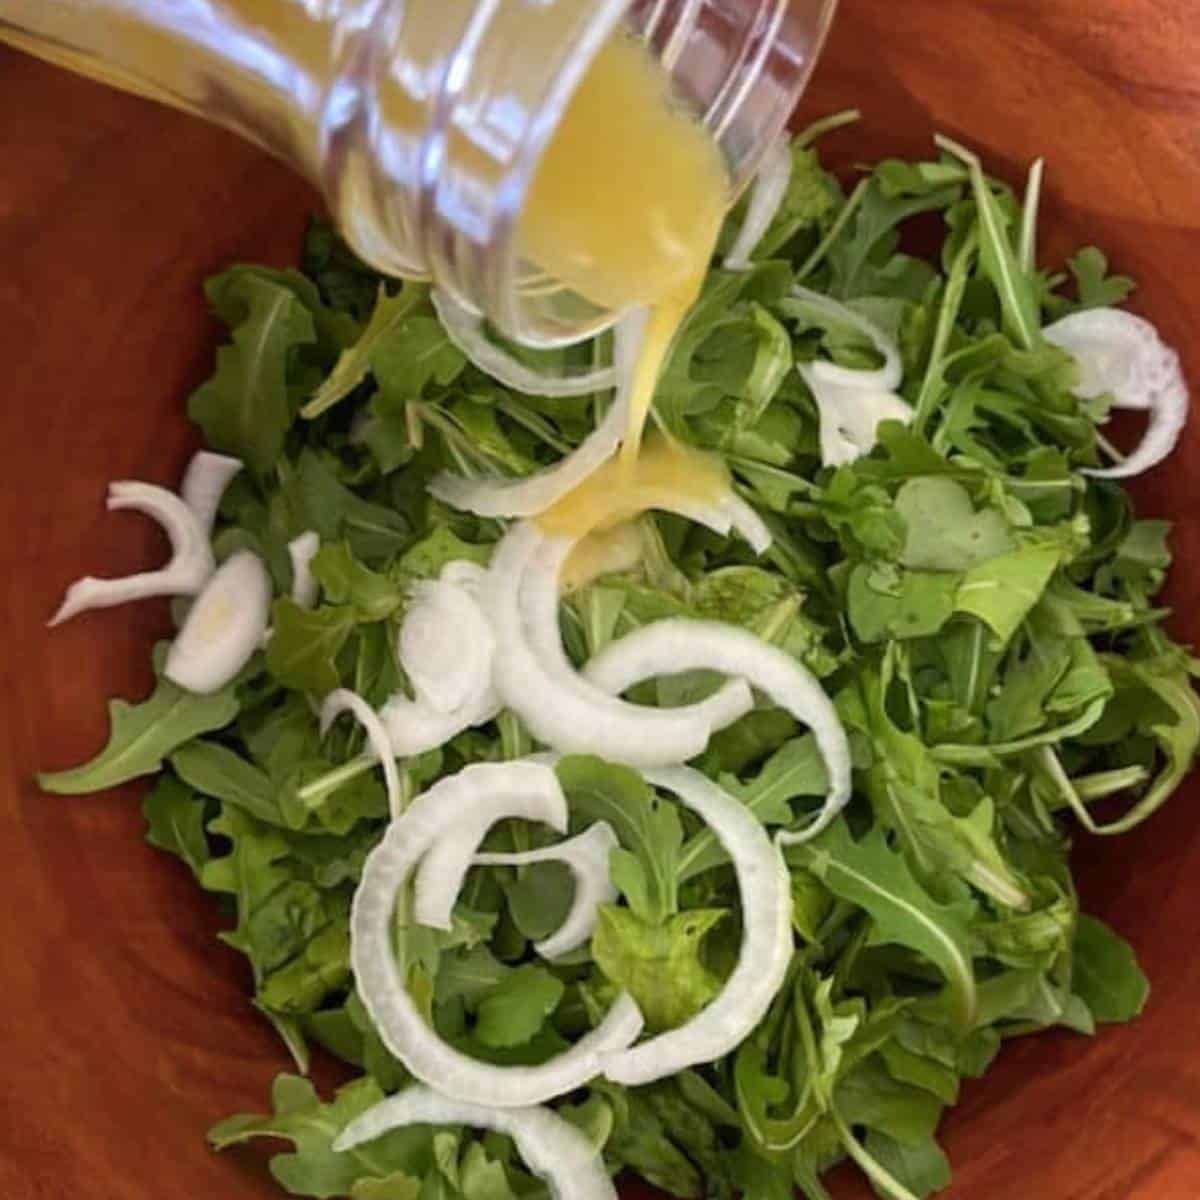 Pouring dressing over salad.